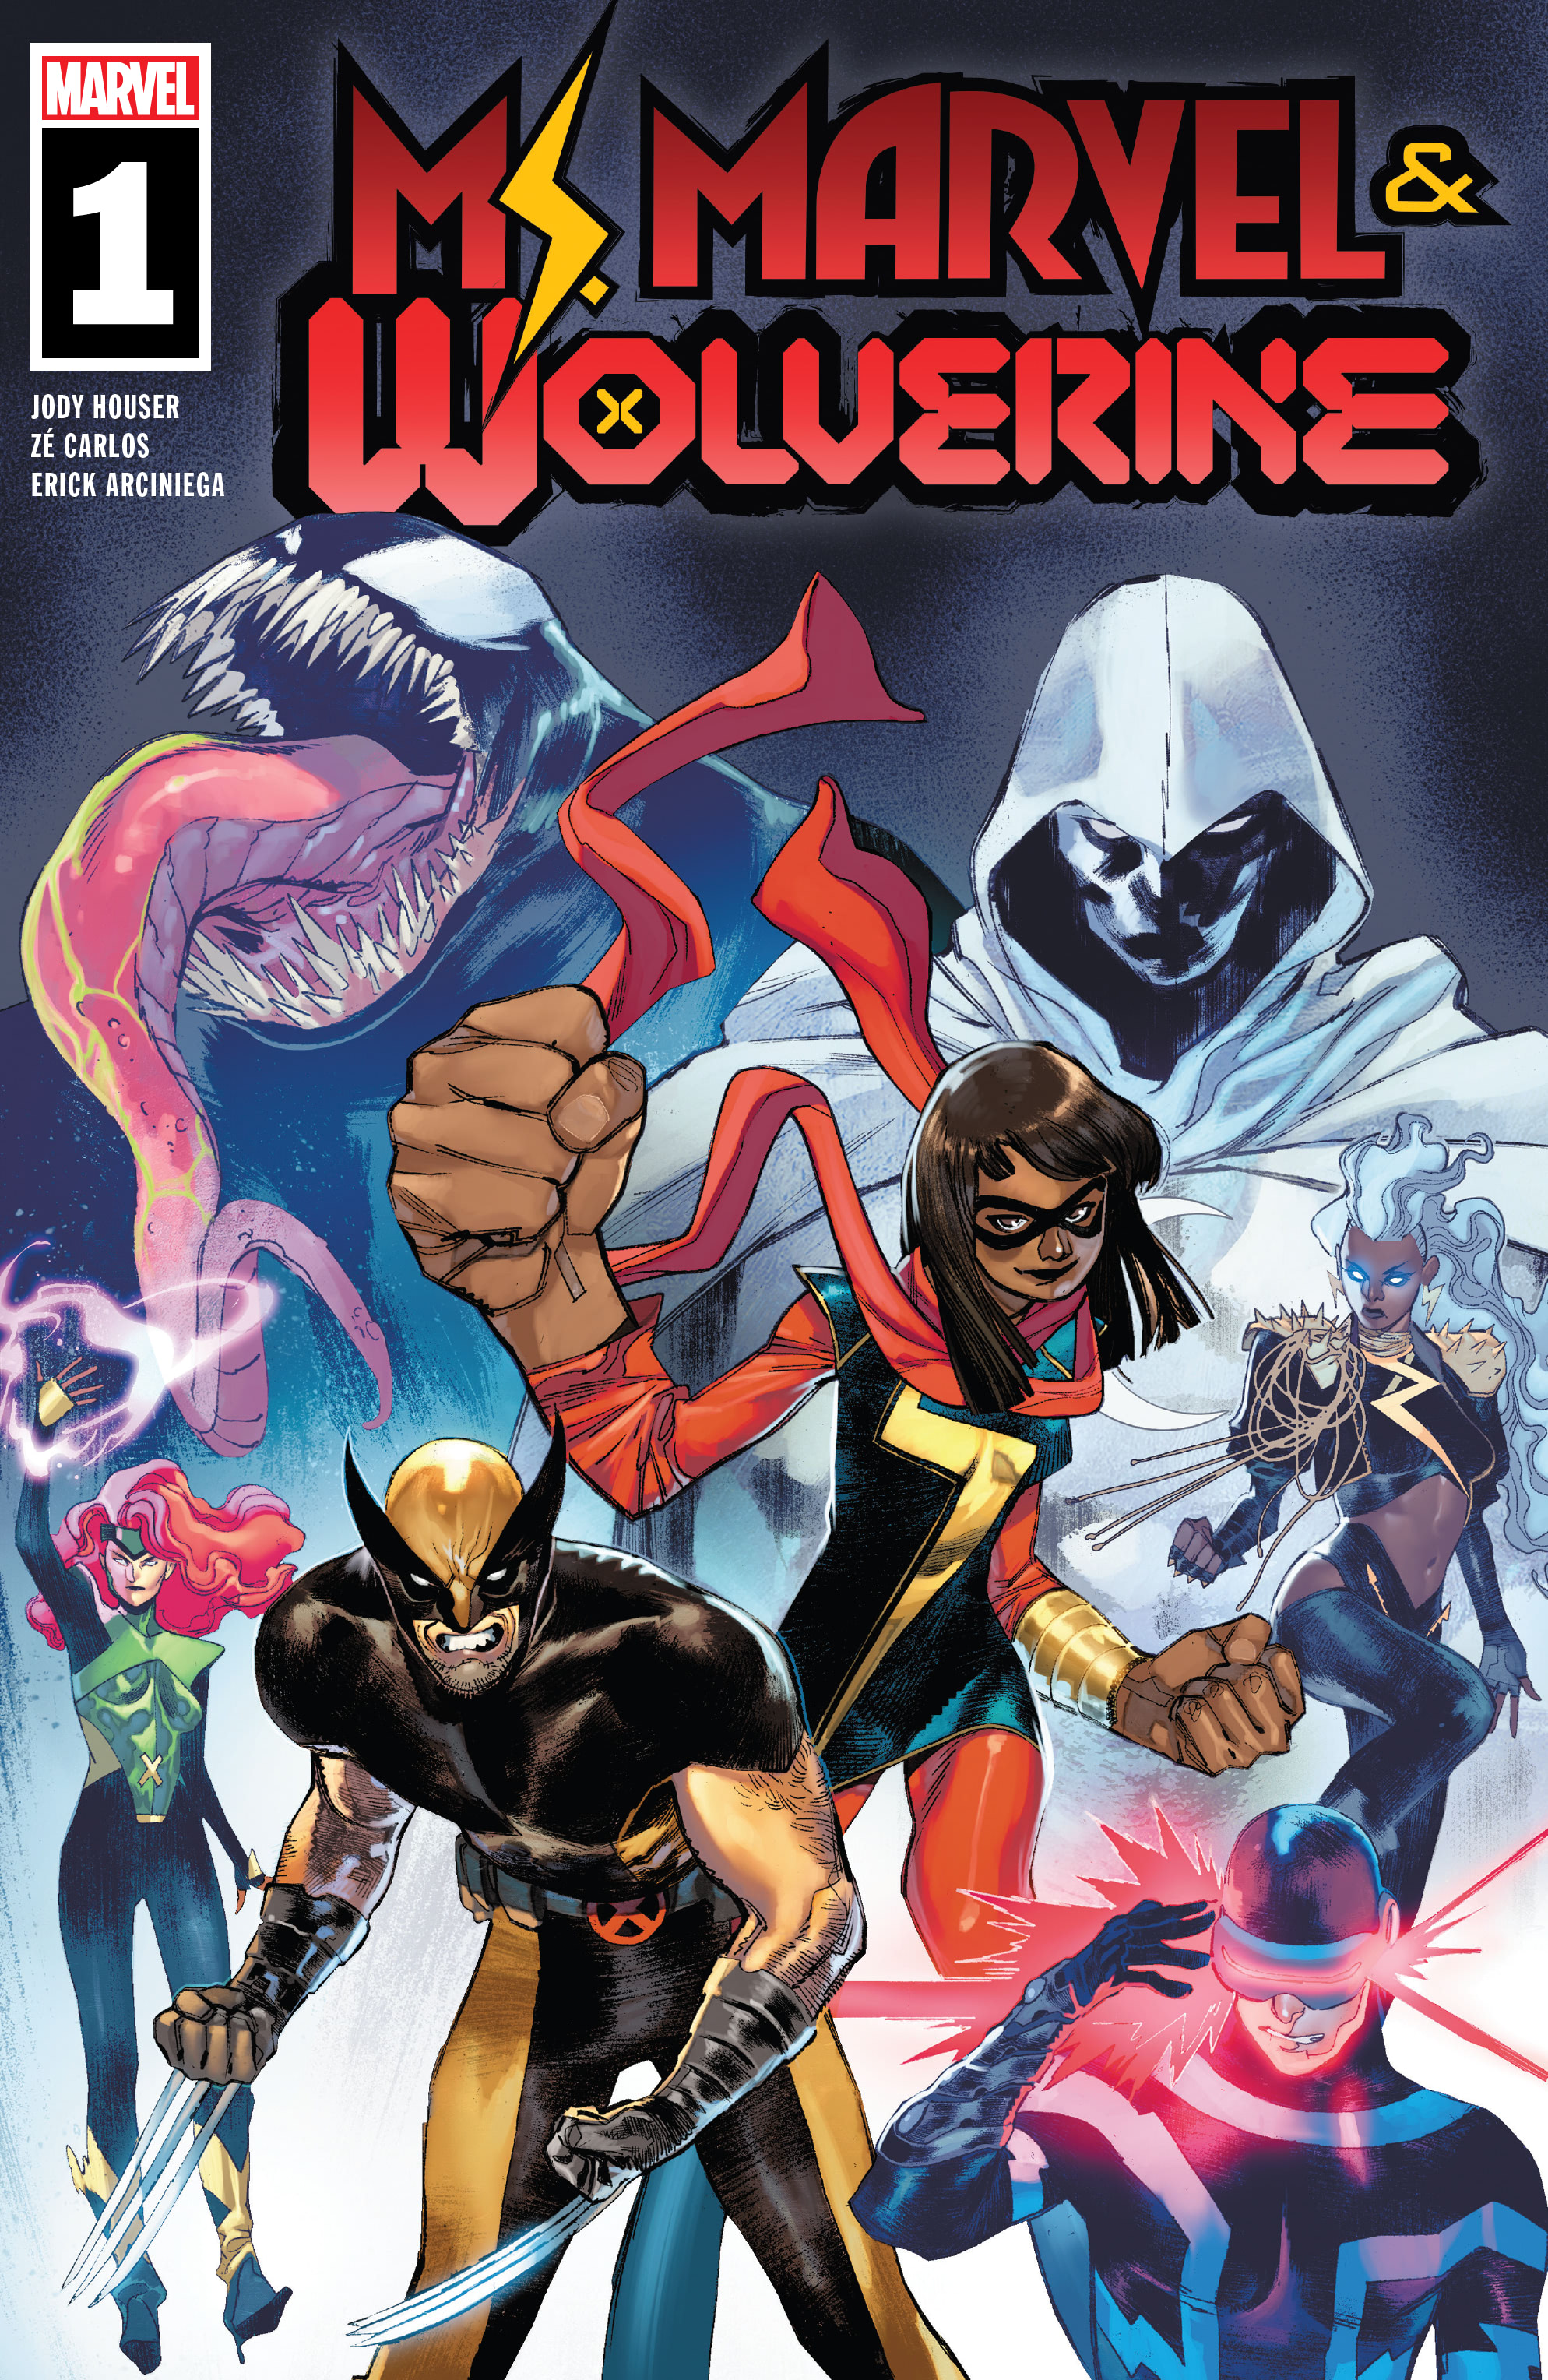 Read online Ms. Marvel & Wolverine comic -  Issue #1 - 1